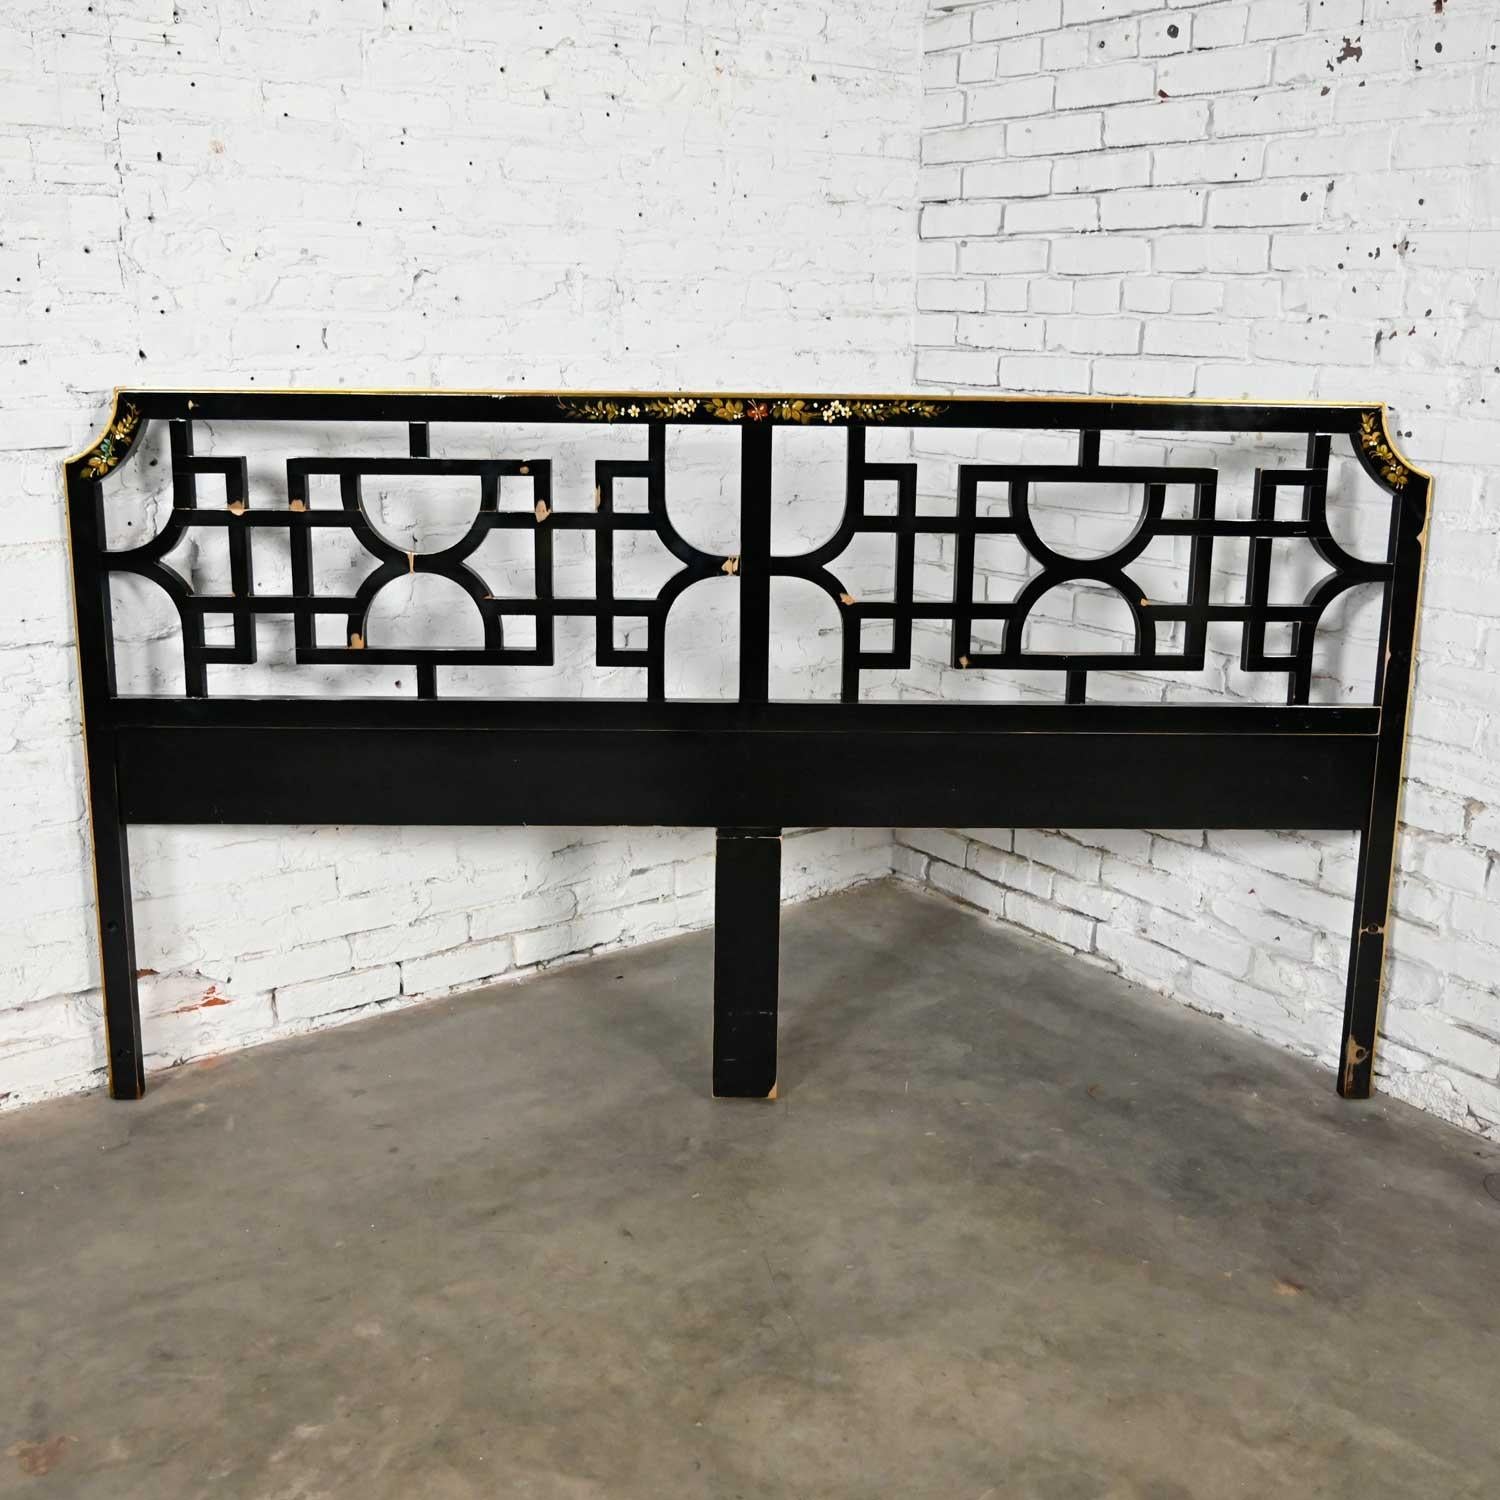 Phenomenal vintage Union National chinoiserie carved fretwork style king-sized headboard black painted with tole painted floral and butterflies design & distressed patina finish signed Dimas. Beautiful condition, keeping in mind that this is vintage